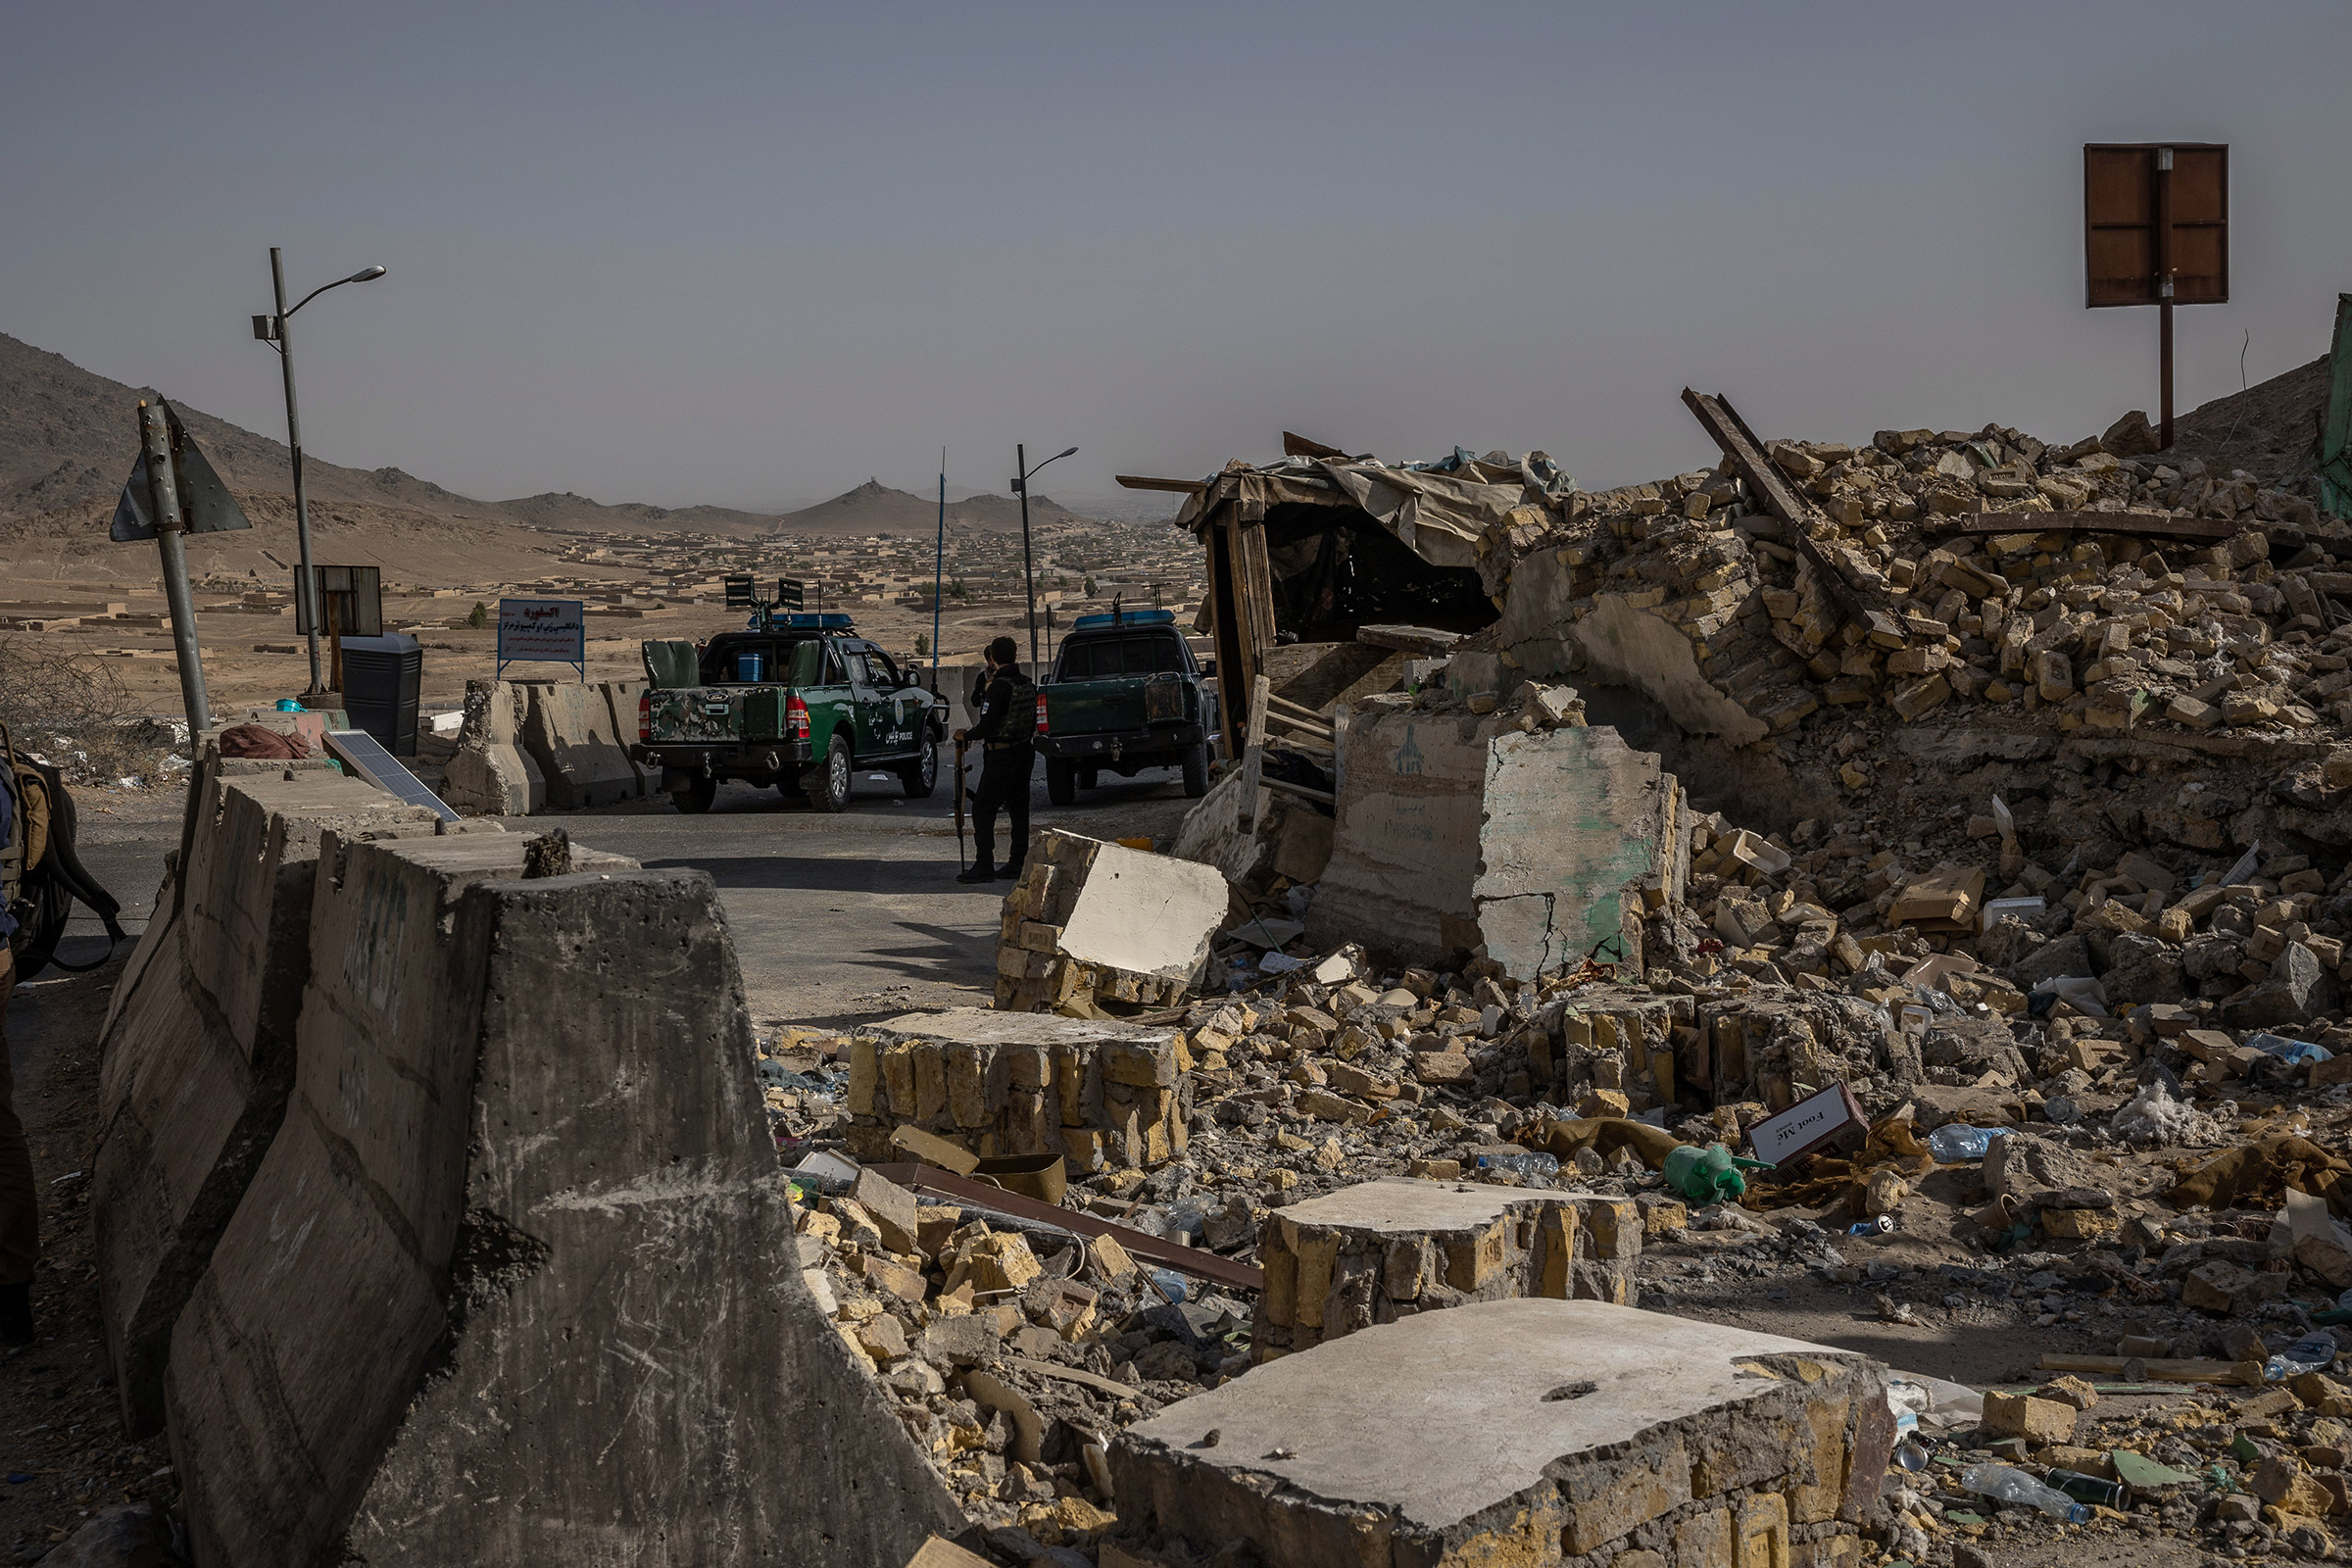 A police outpost, that was destroyed by the Taliban, in Kandahar, Afghanistan on Aug. 4, 2021. (Jim Huylebroek—The New York Times/Reux)